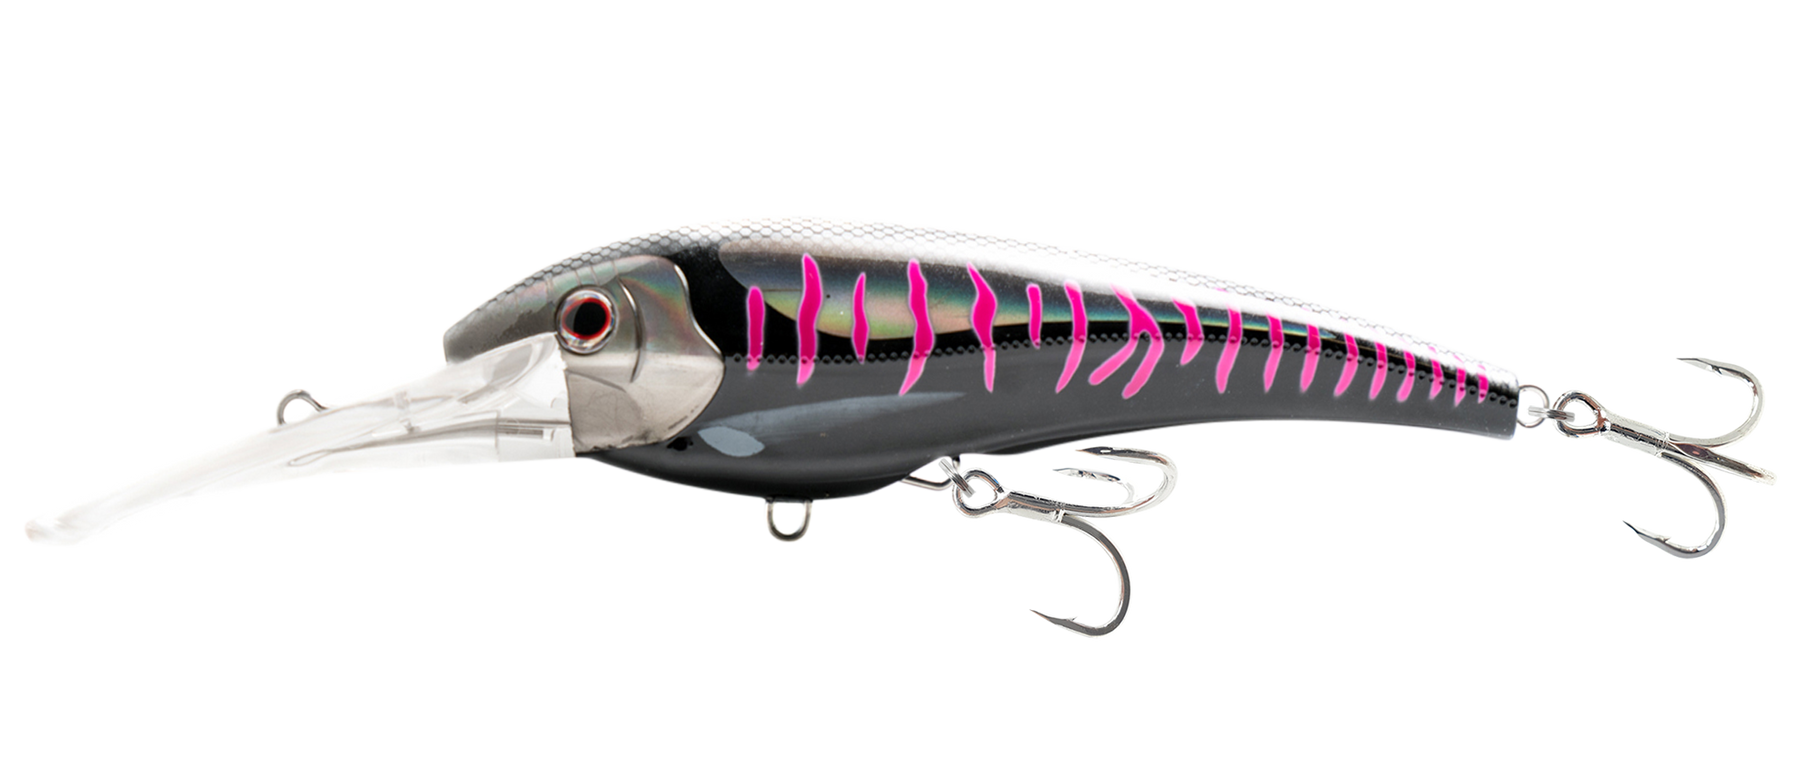 NOMAD DESIGN Saltwater Trolling And Casting Floating Lure DTX